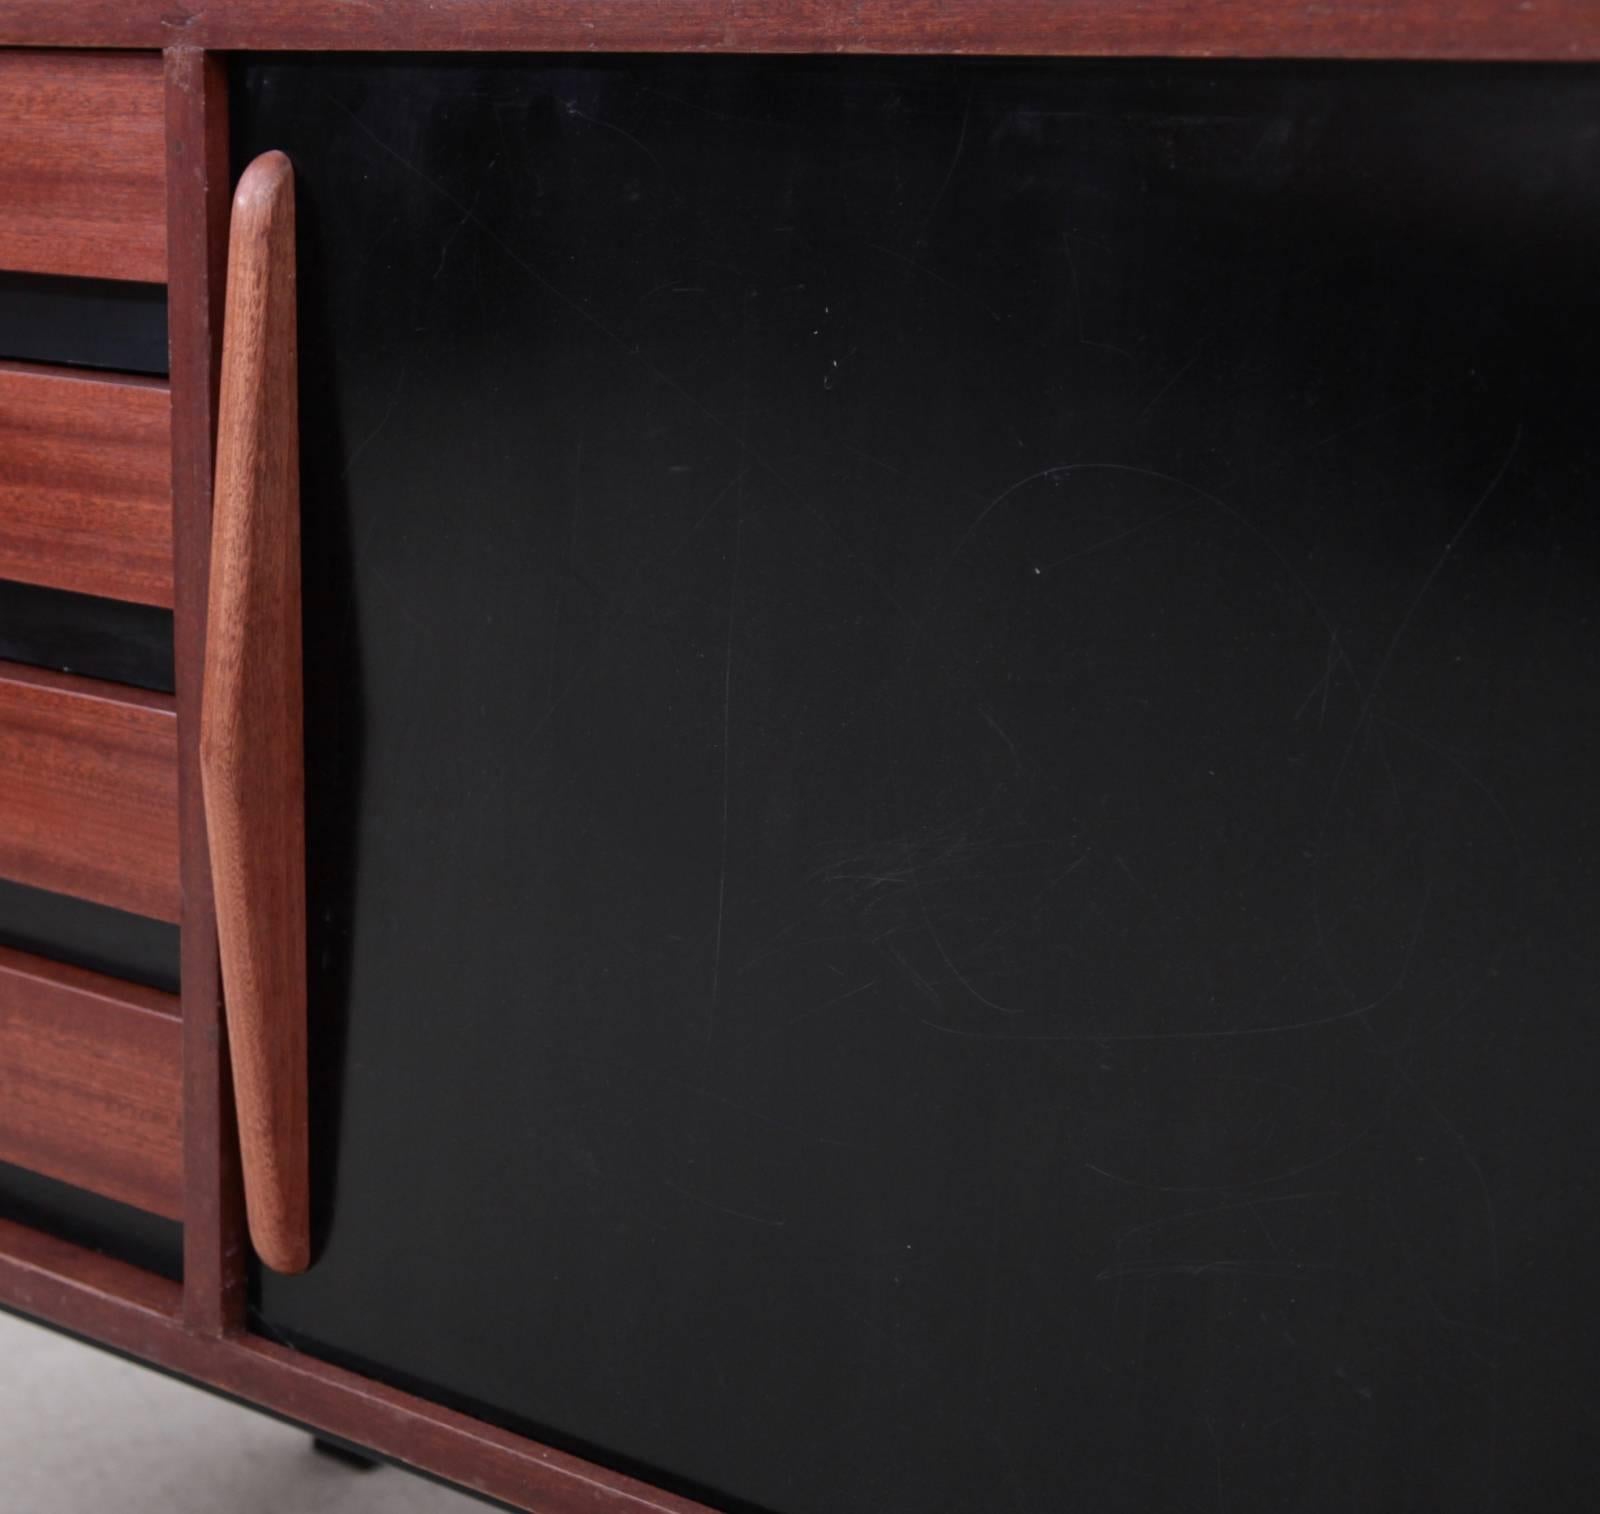 Mauritanian Charlotte Perriand Cansado Sideboard by Steph Simon in Mahogany